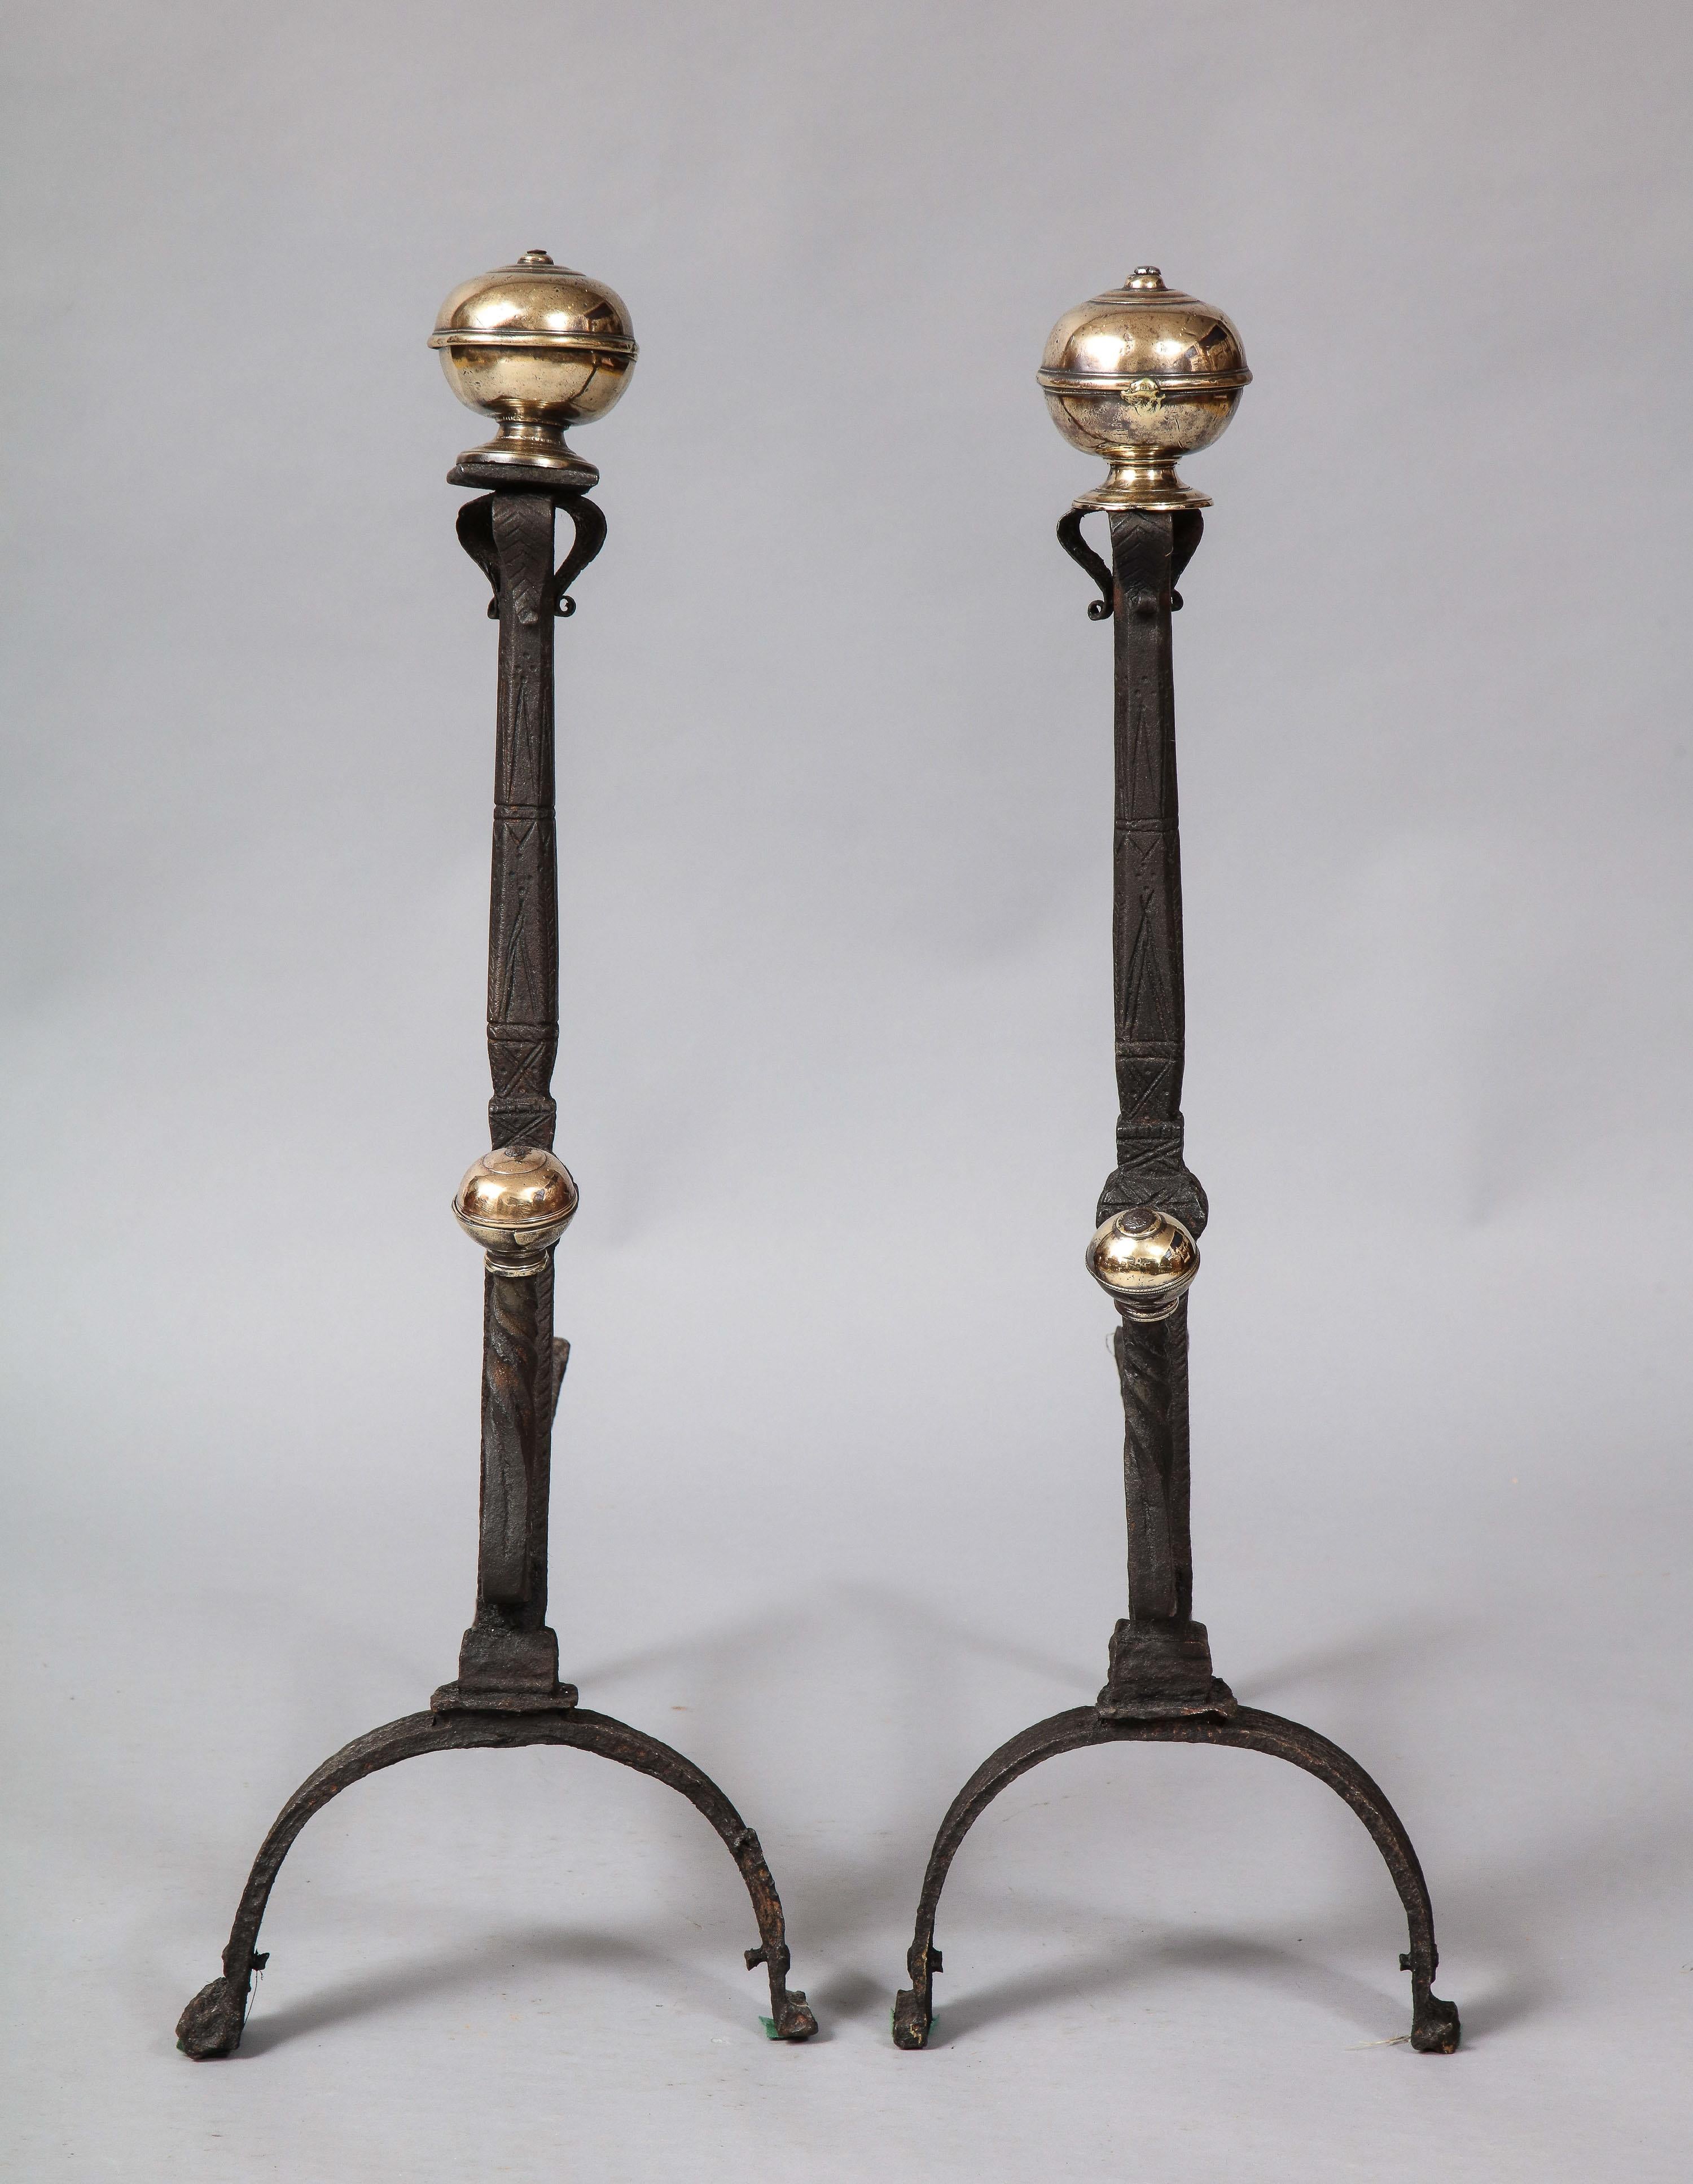 Fine pair of baroque bronze and wrought iron andirons having suppressed ball finials over scrolled petals on octagonal flared shafts both with etched decoration and standing on arched legs with scrolled feet, the fronts with spit supports having